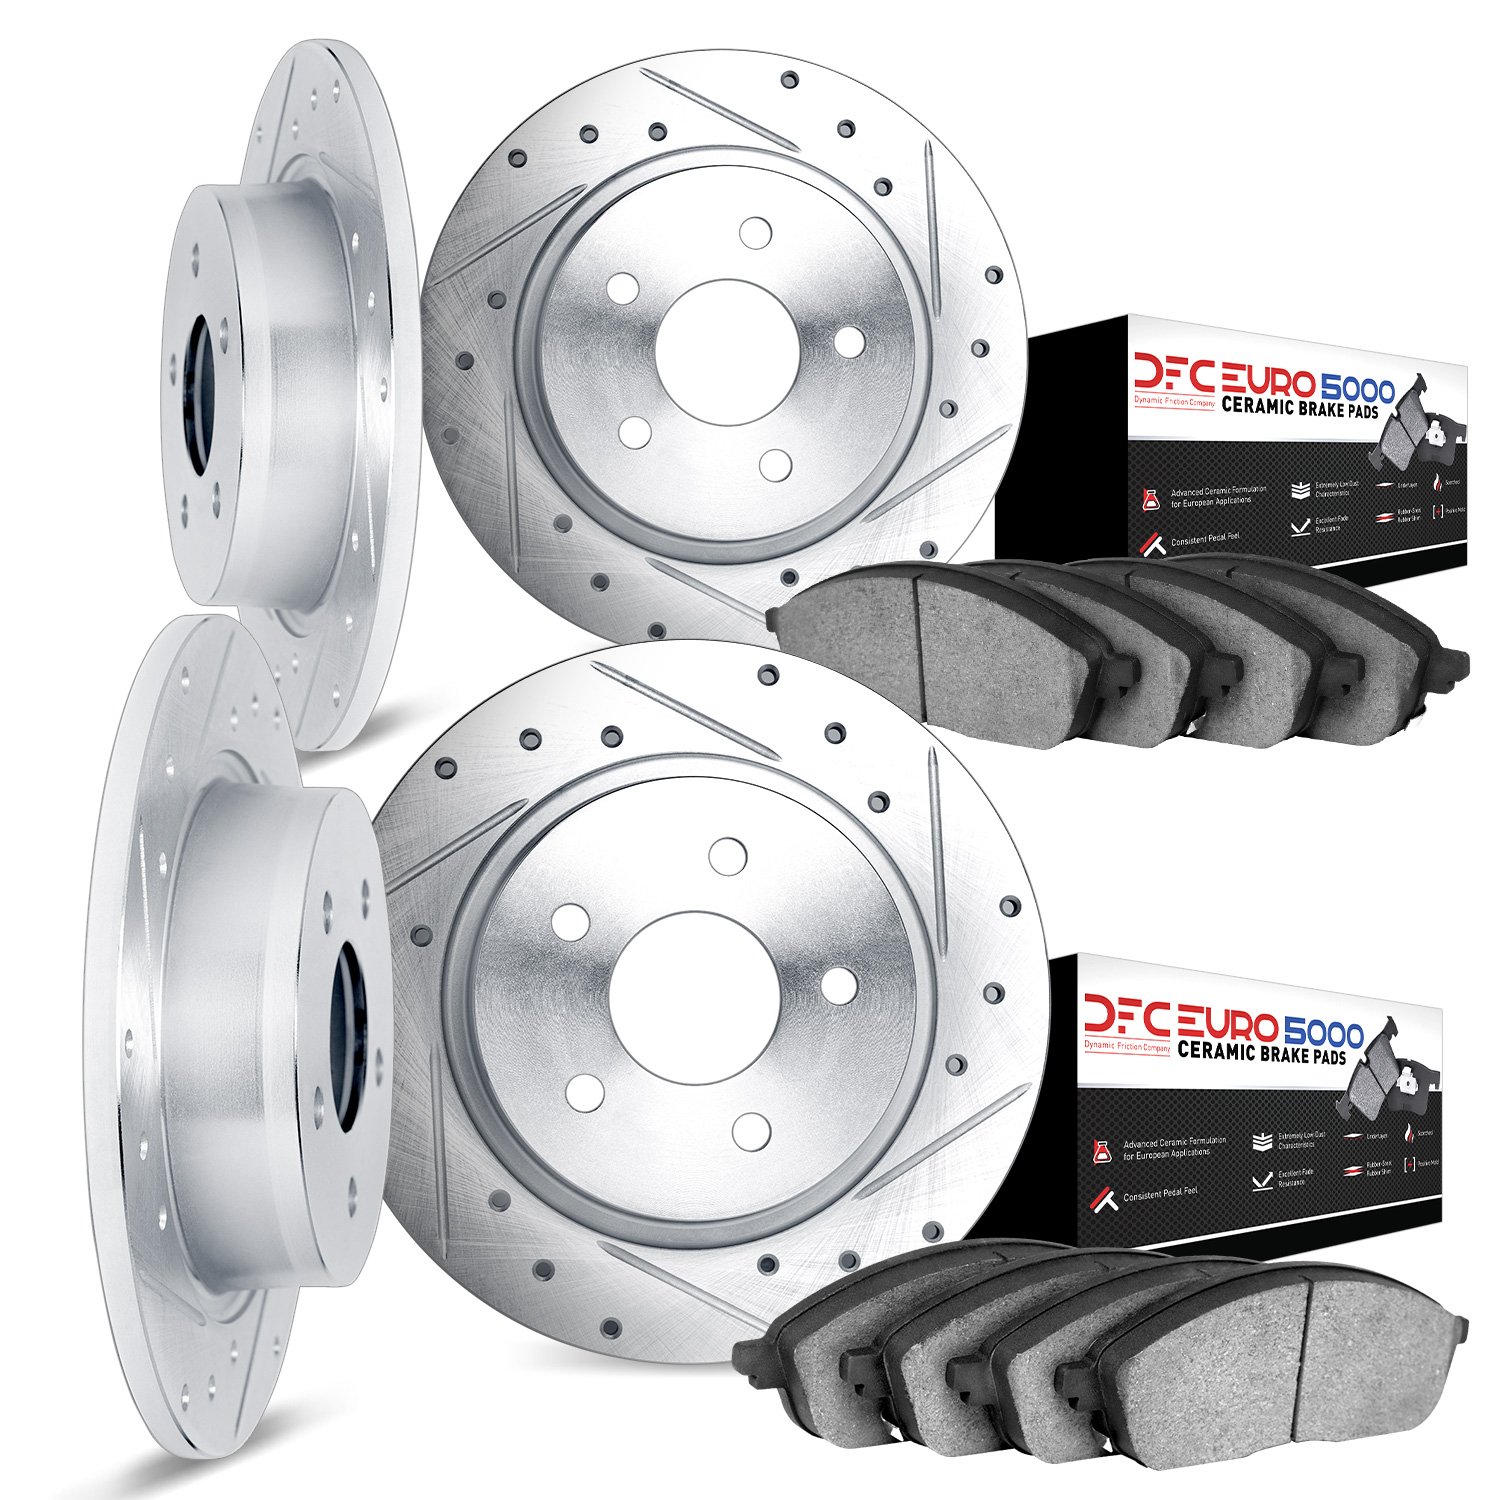 7604-63003 Drilled/Slotted Brake Rotors w/5000 Euro Ceramic Brake Pads Kit [Silver], 1964-1966 Mercedes-Benz, Position: Front an